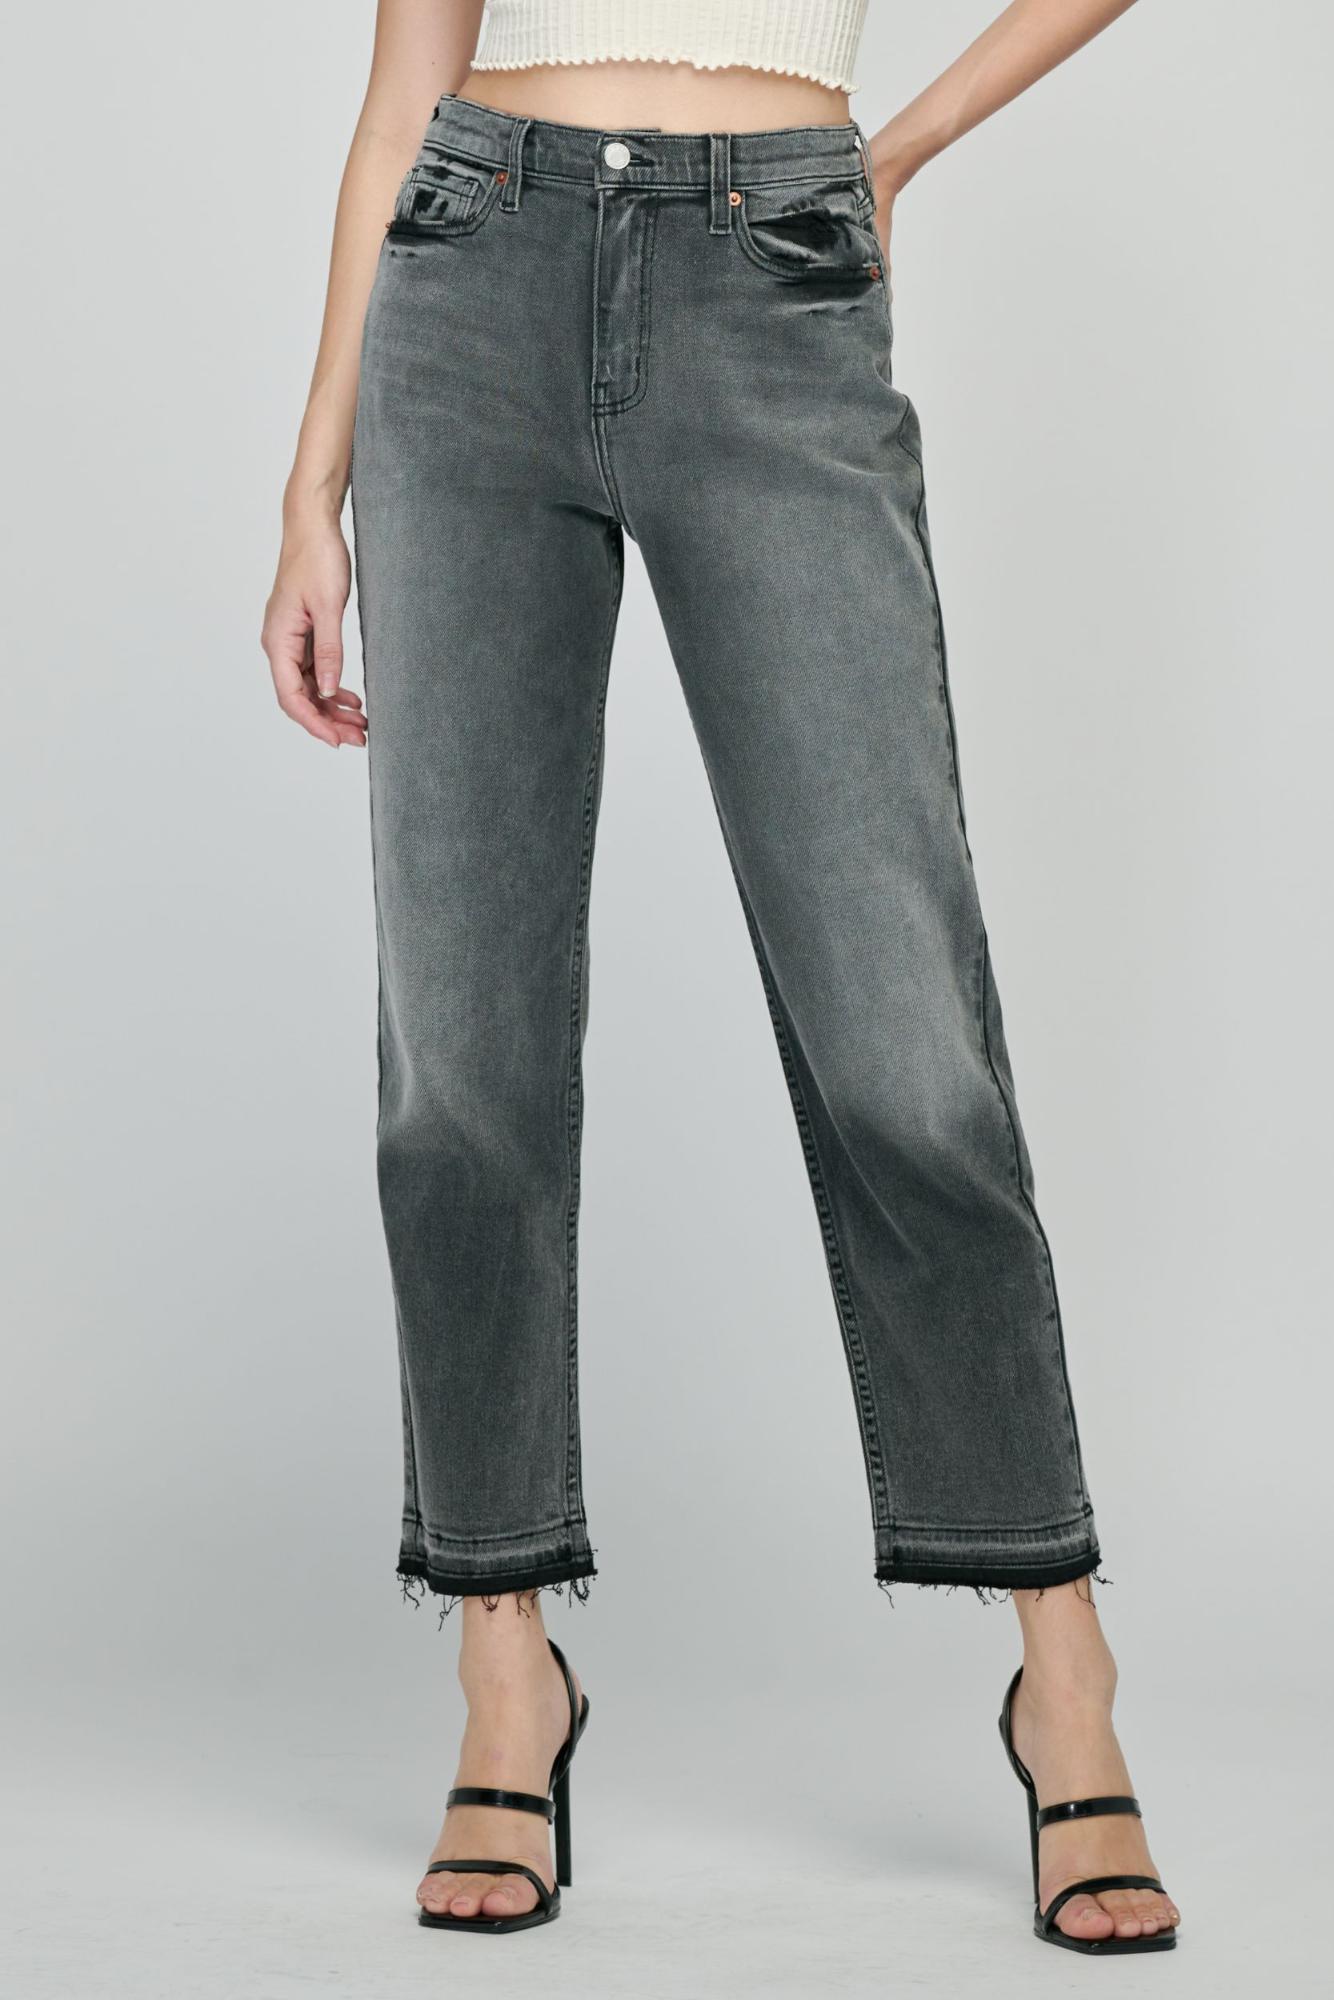 The Ally High Rise Mom Jeans